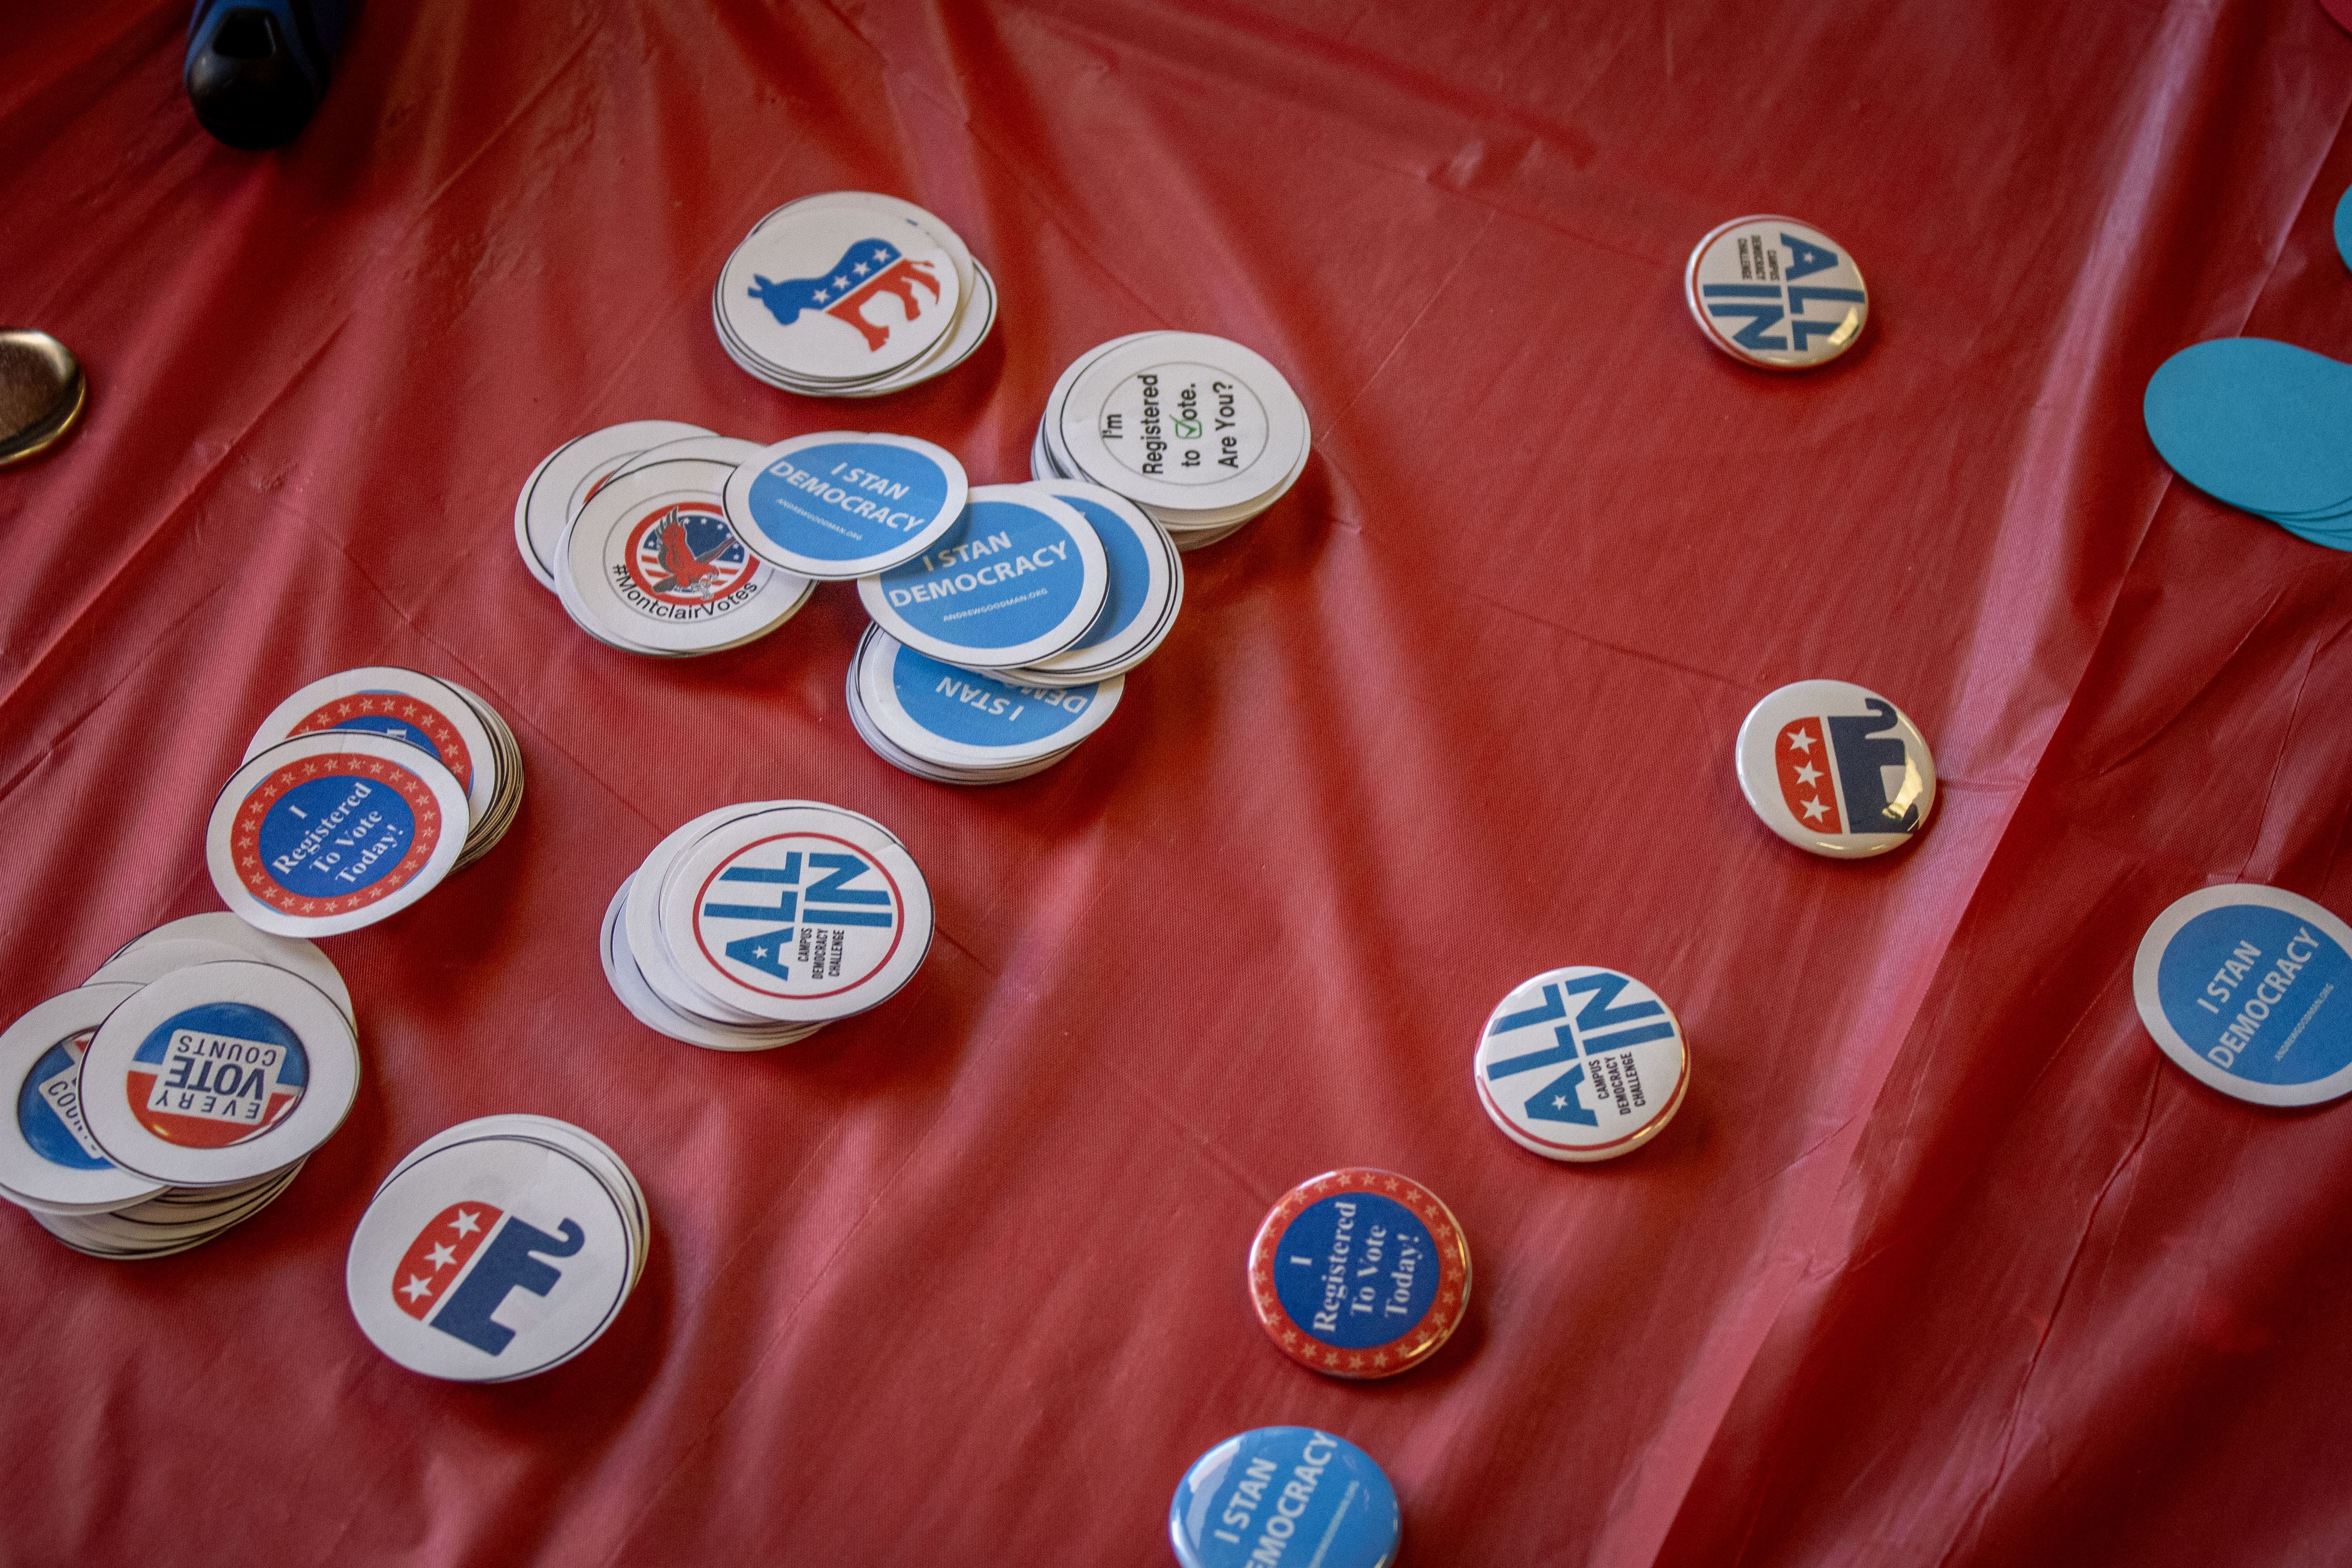 At the National Voter Registration Day event, students were able to make and customize pinback buttons.
Dani Mazariegos | The Montclarion